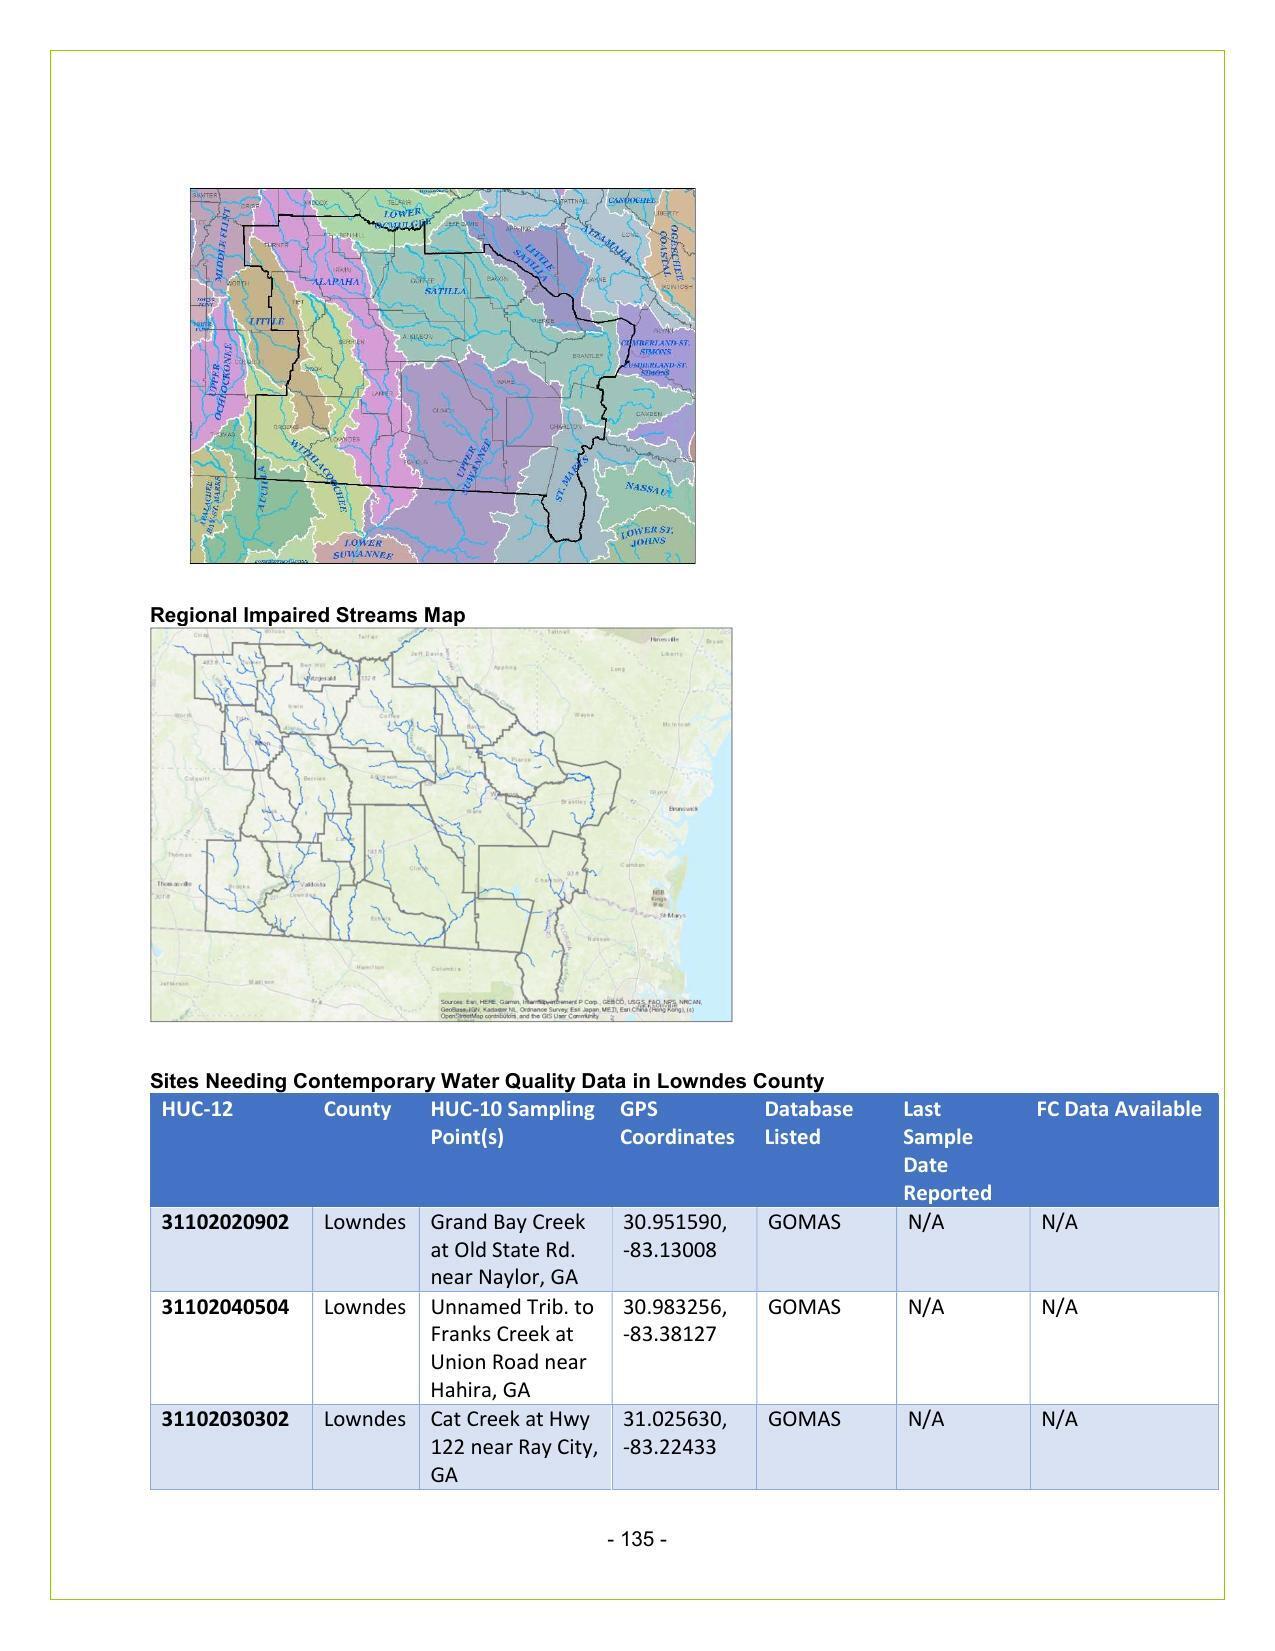 Regional Impaired Streams Map; Sites Needing Contemporary Water Quality Data in Lowndes County